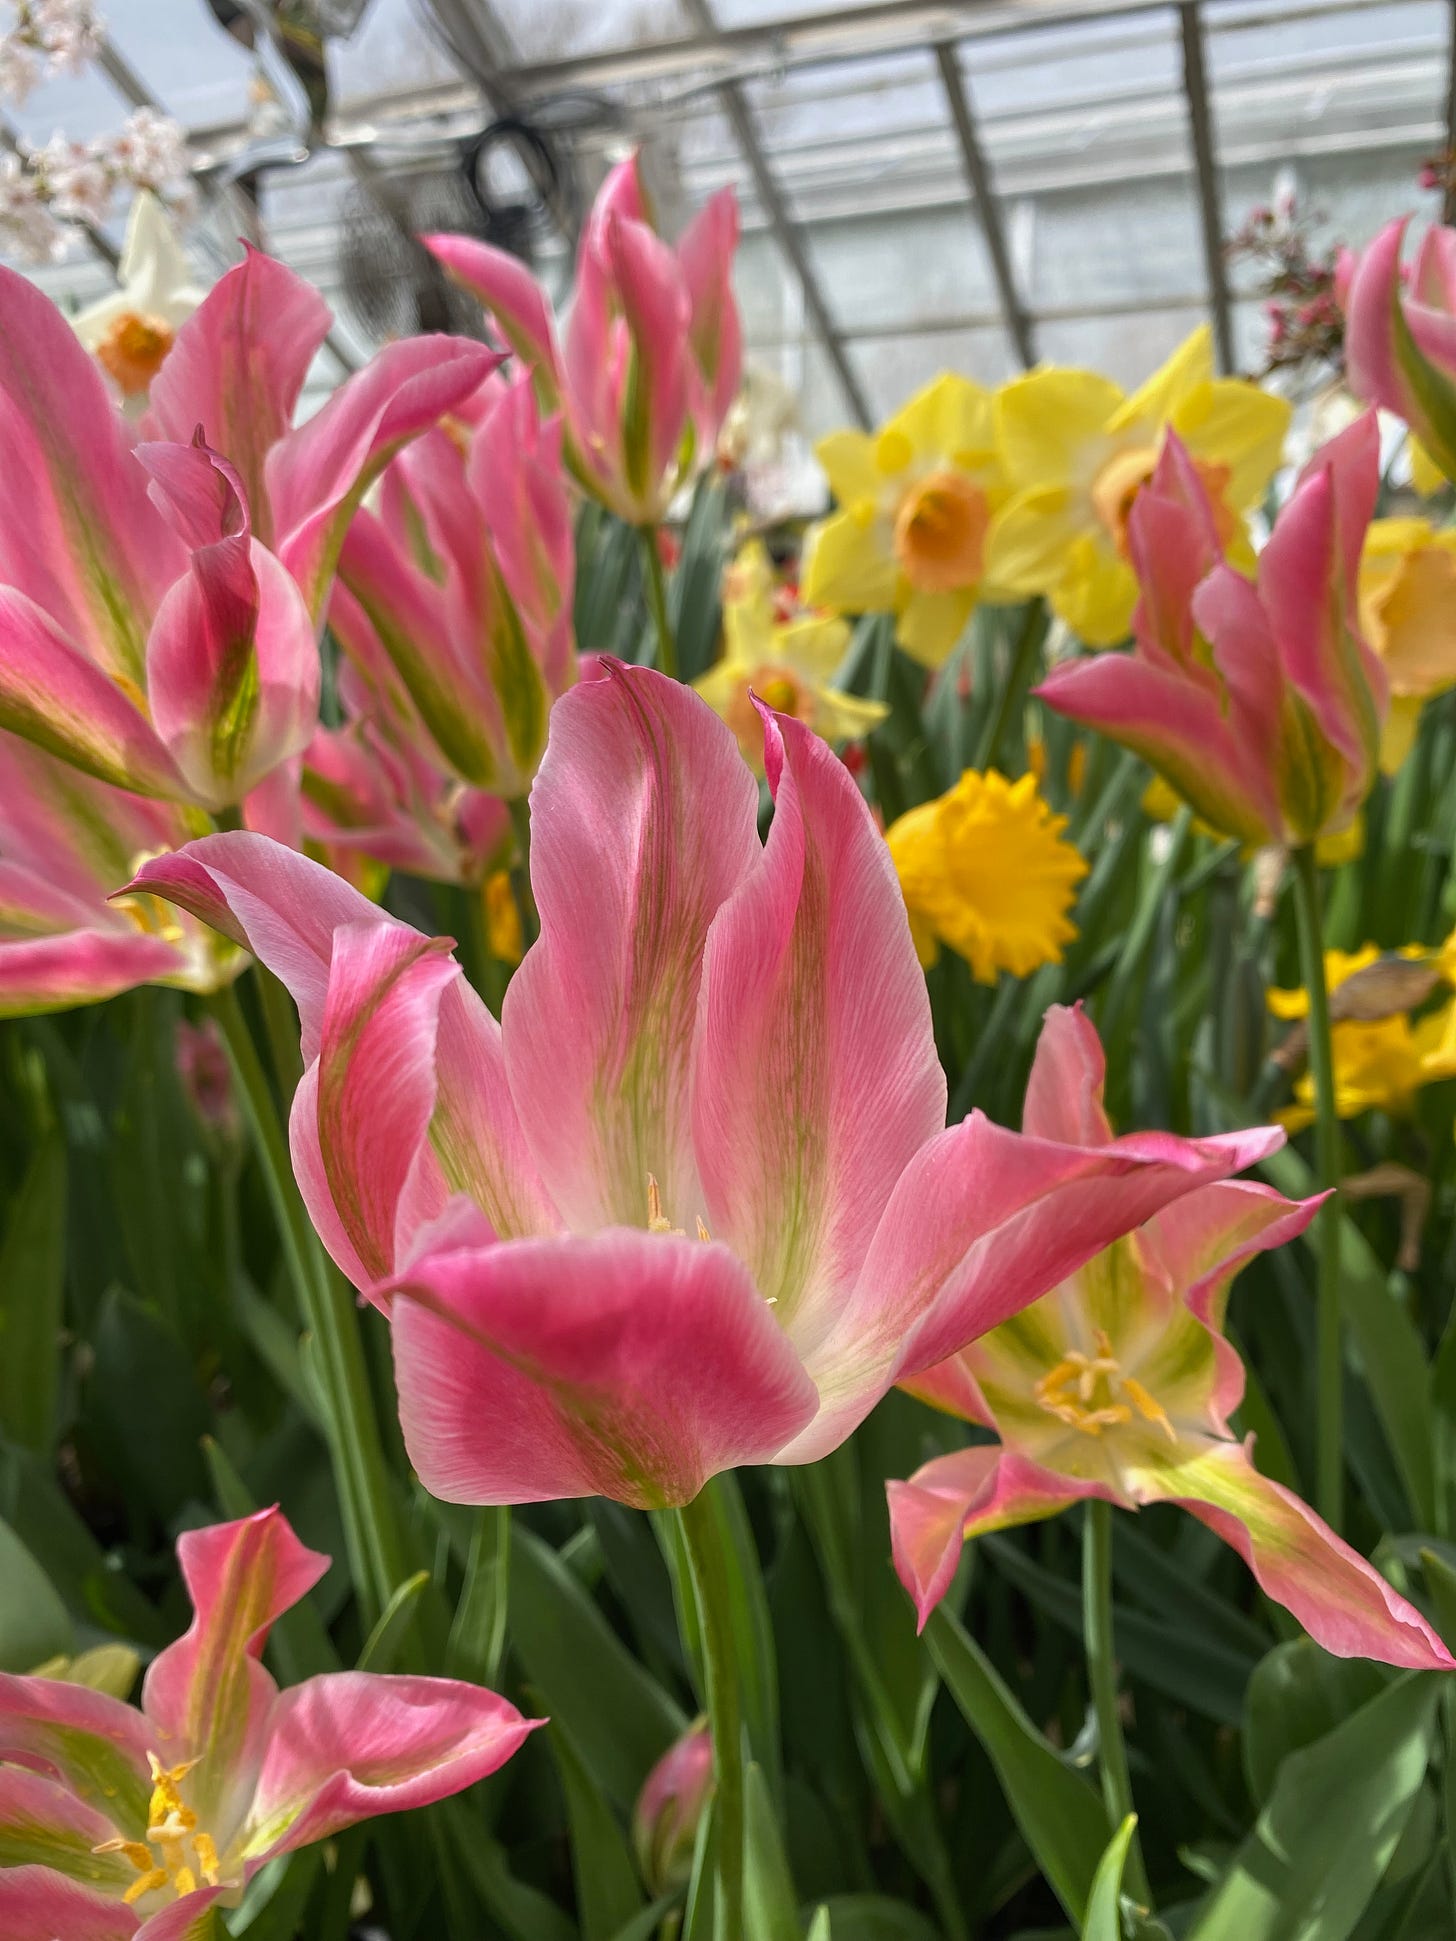 A cluster of pink and green striped tulips with angular, pointy oetals. There are lots of yellow daffodils in the background.